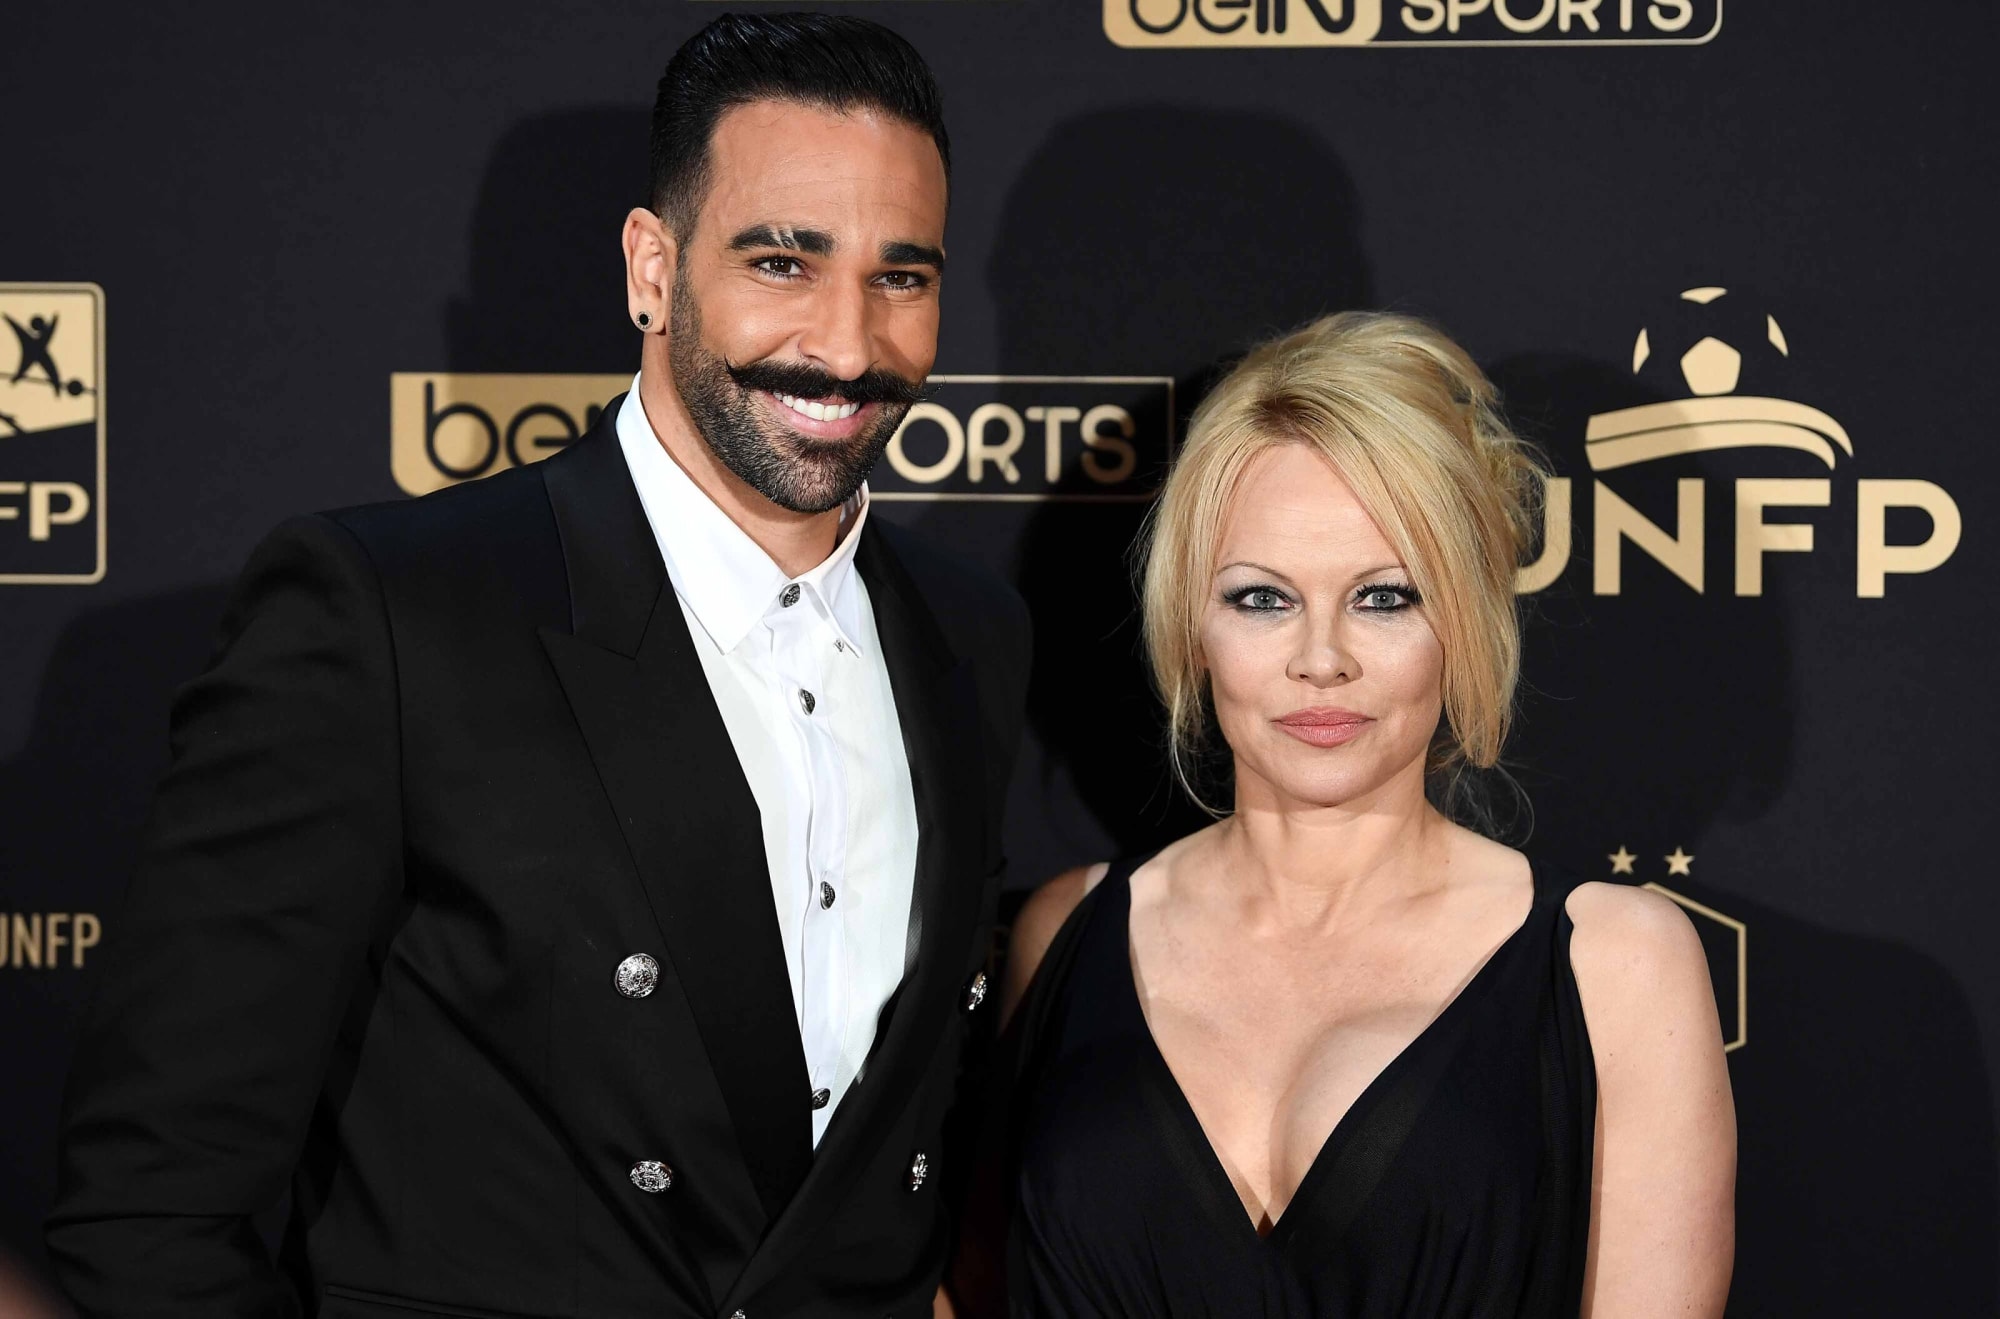 Who was the French soccer player Pamela Anderson dated?